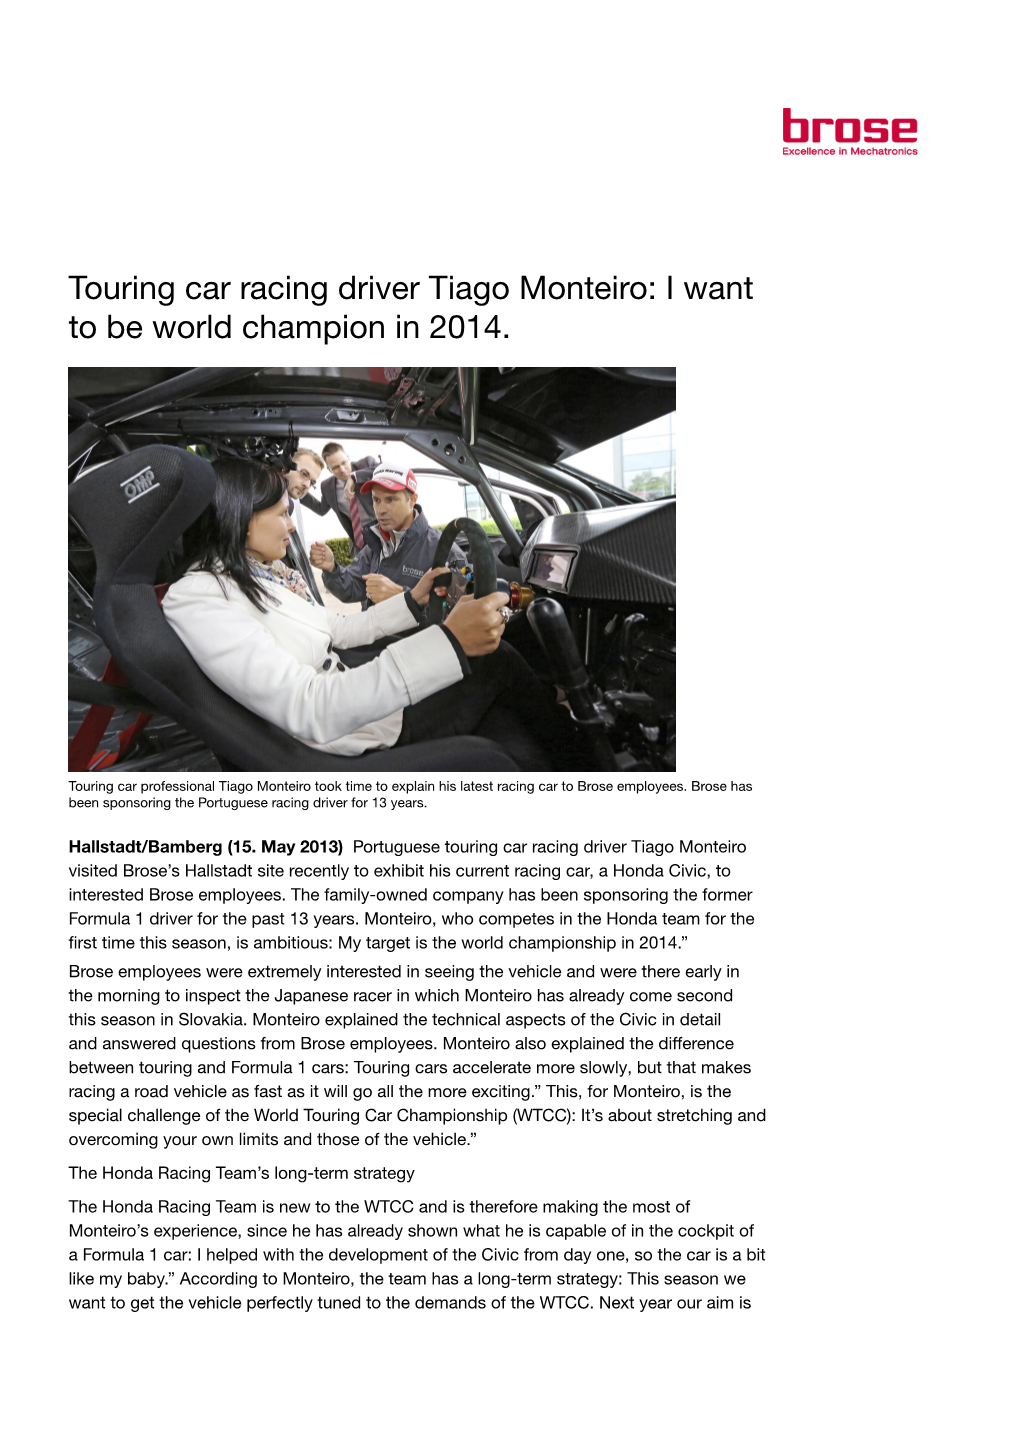 Touring Car Racing Driver Tiago Monteiro: I Want to Be World Champion in 2014